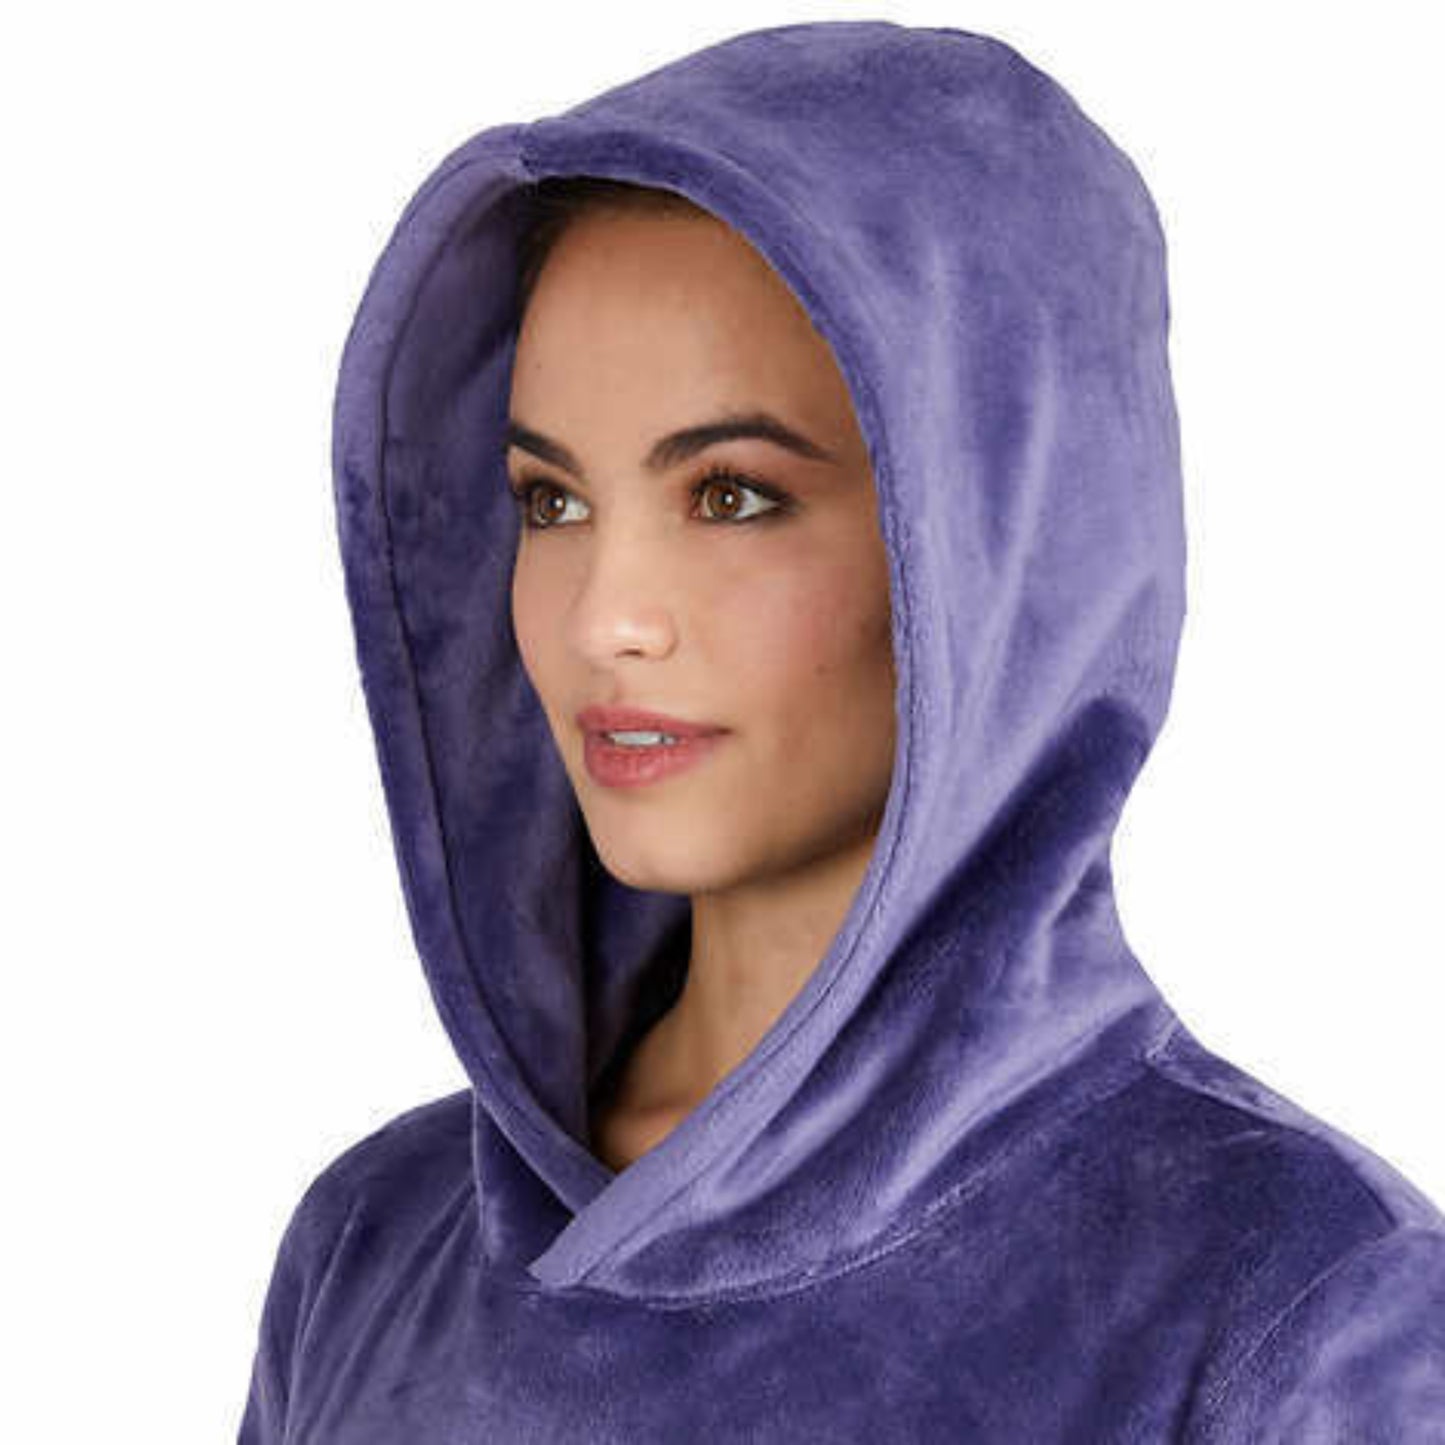 32 Degrees Super Soft Velour Relaxed Fit Hooded Lounger